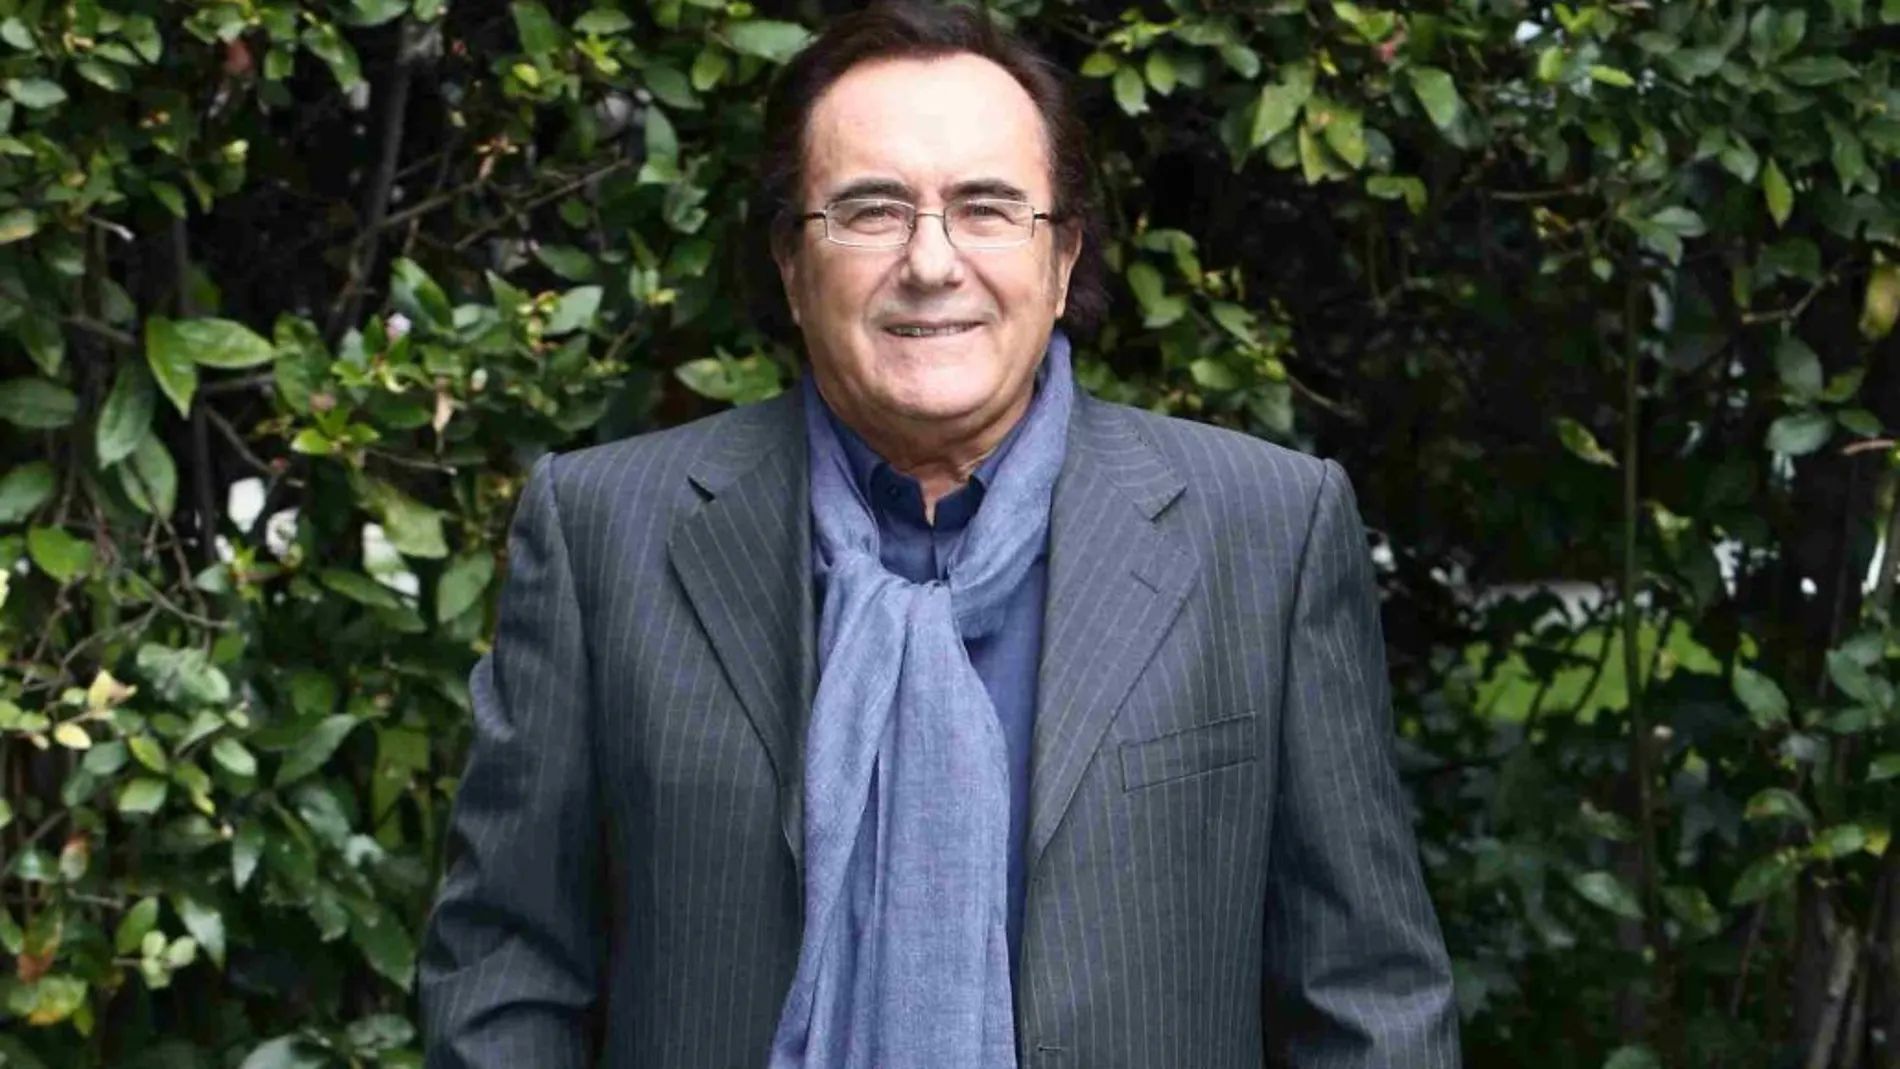 Singer Albano attending Photcall of the TV Show "Cos“ vicini cos“ lontani"Rome- Italy20-01-2016